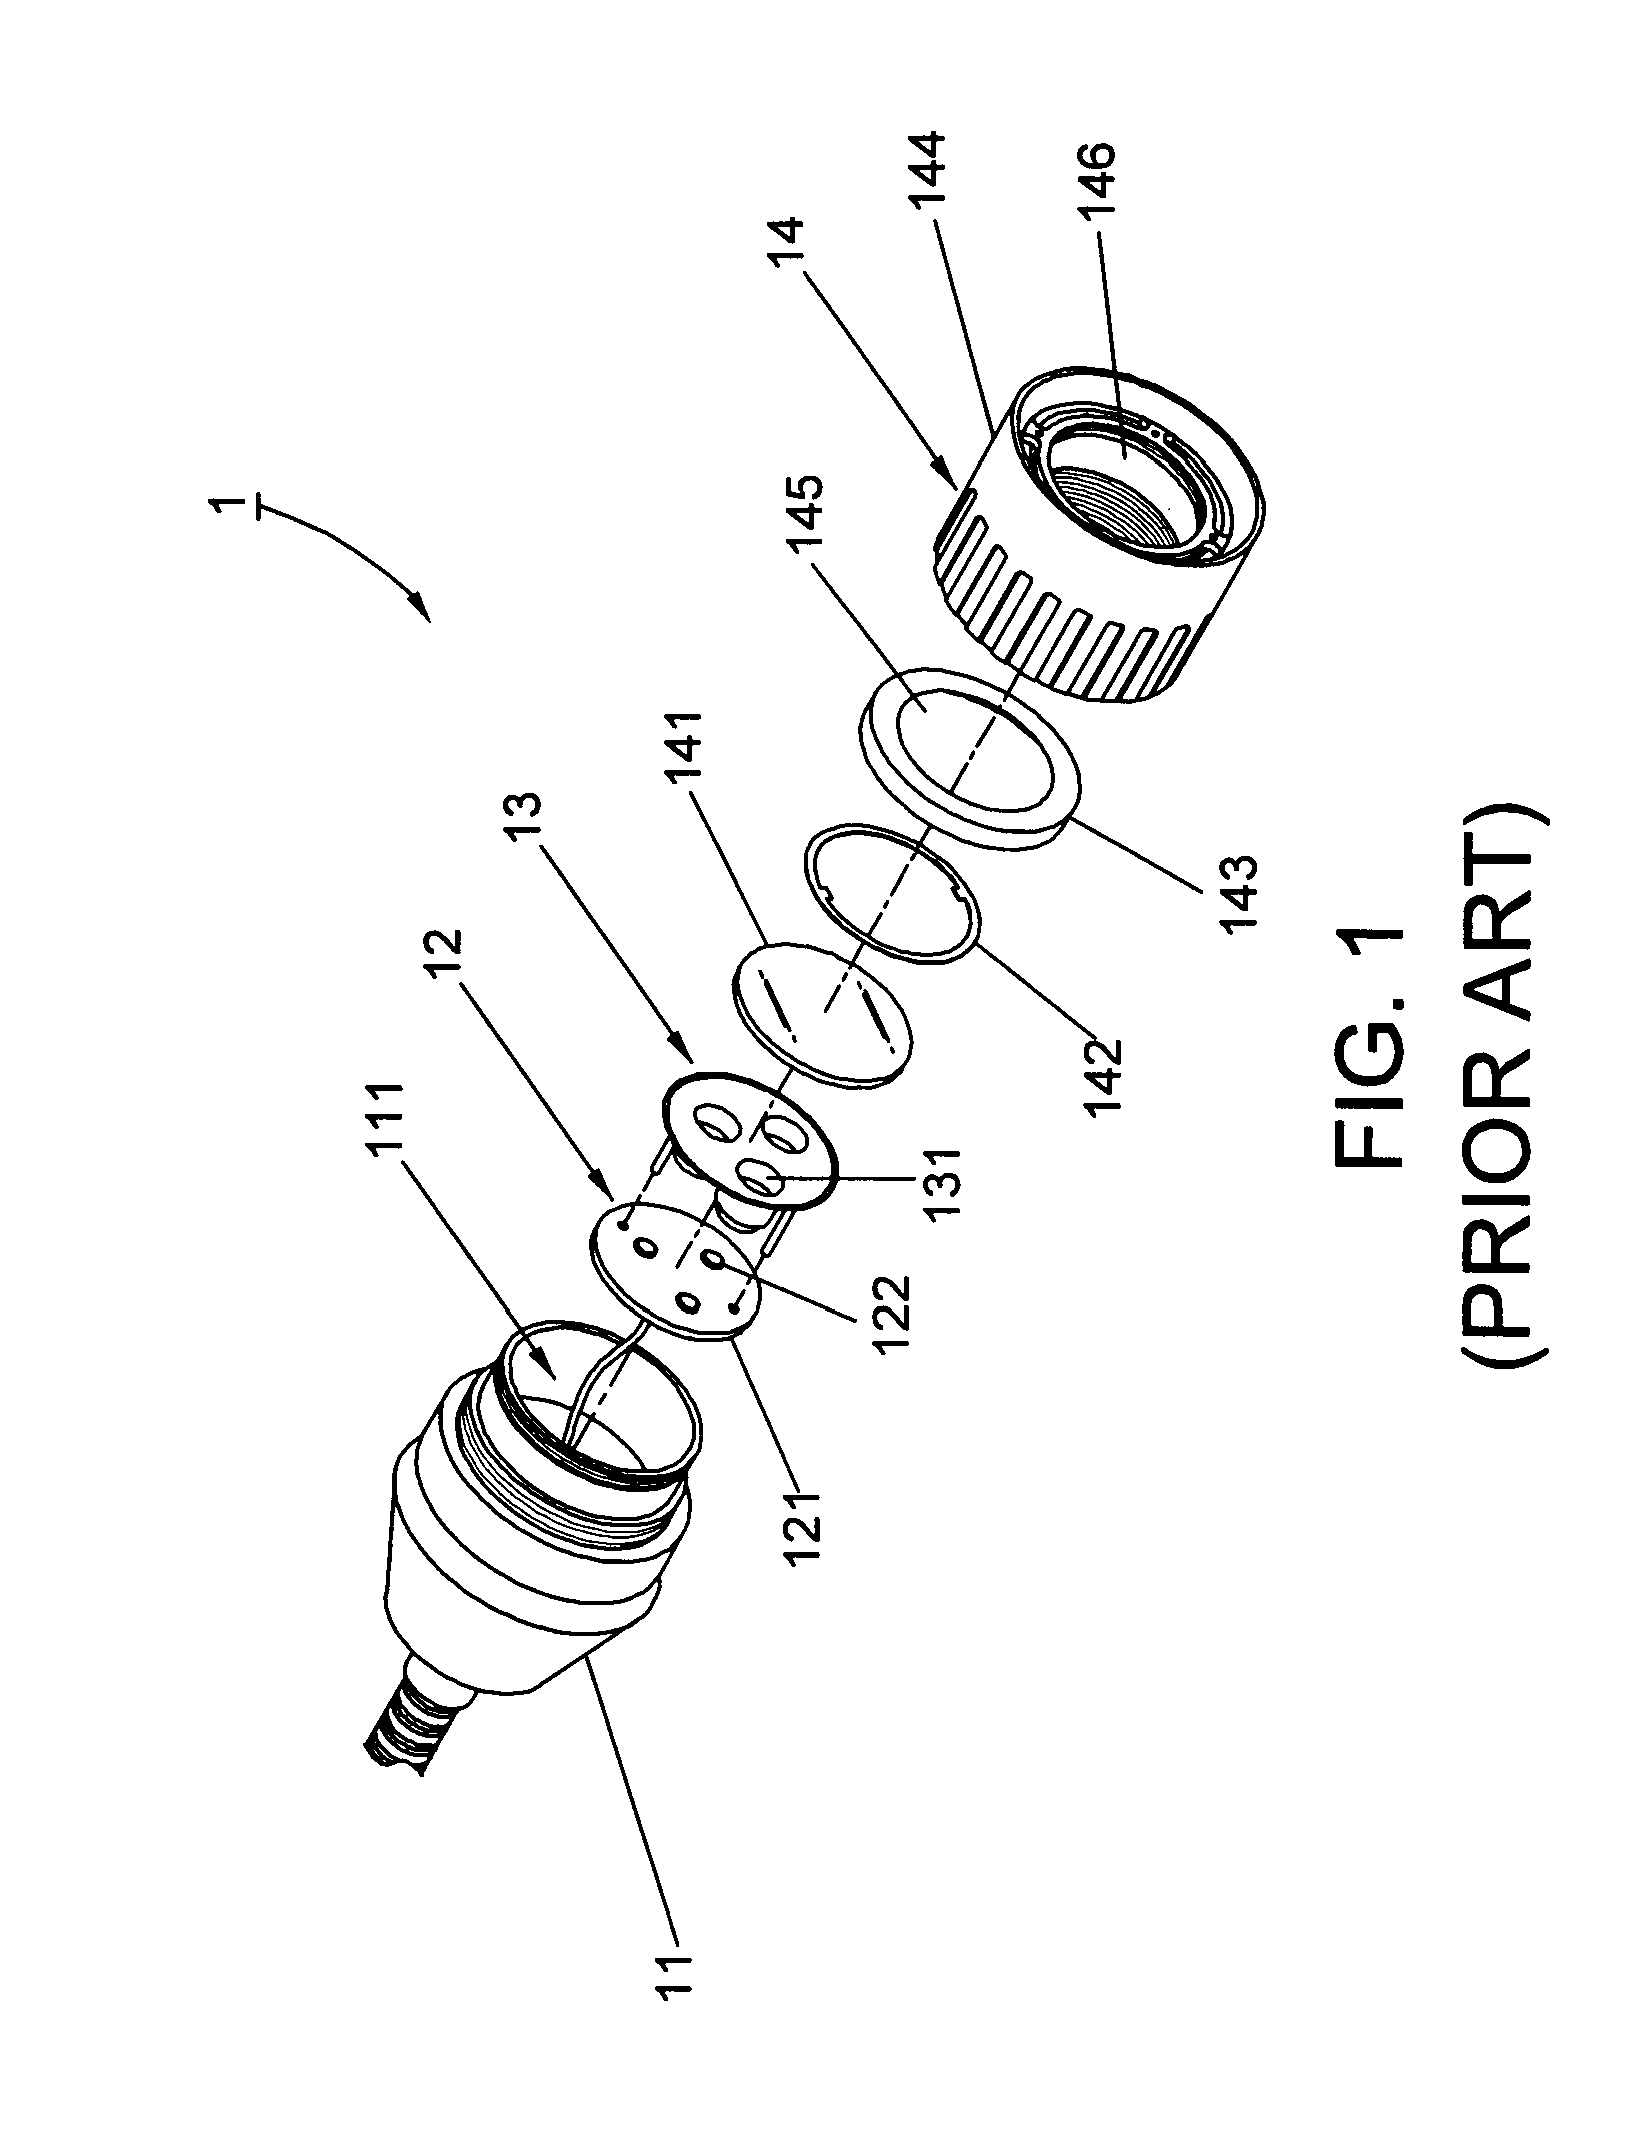 LED lamp capable of adjusting a beam spread thereof